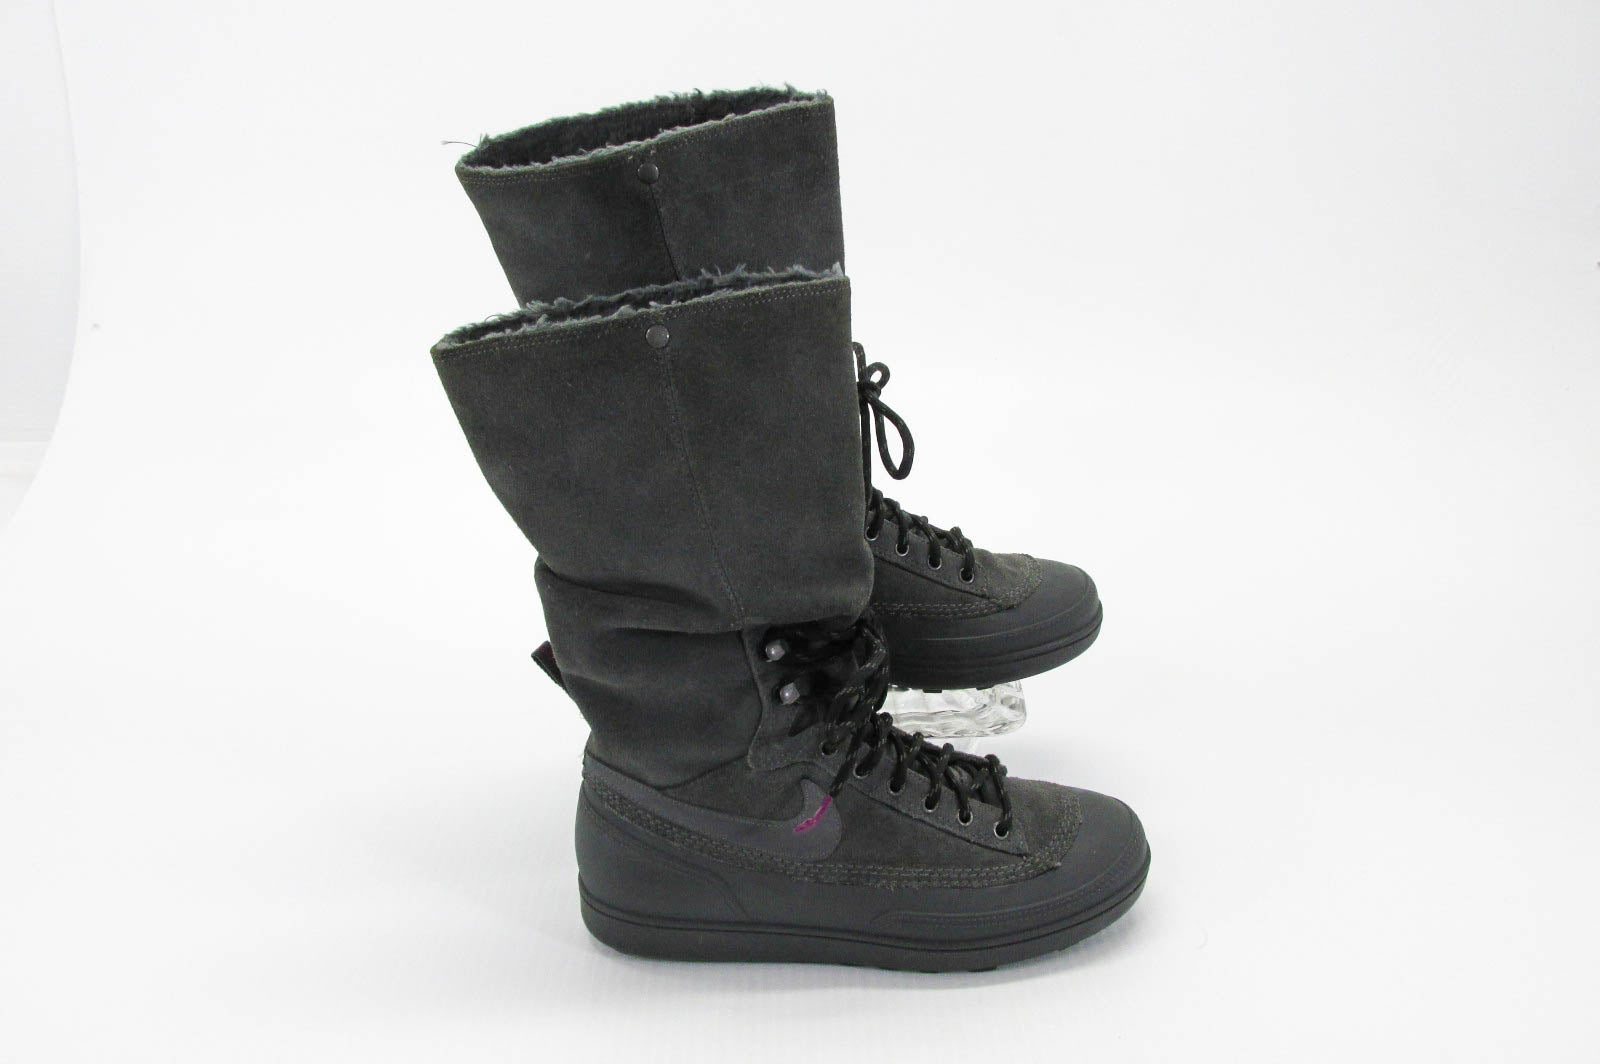 Nike Womens Boot Warrior Size 5M Gray Pre Owned vq – UnderTenShoes